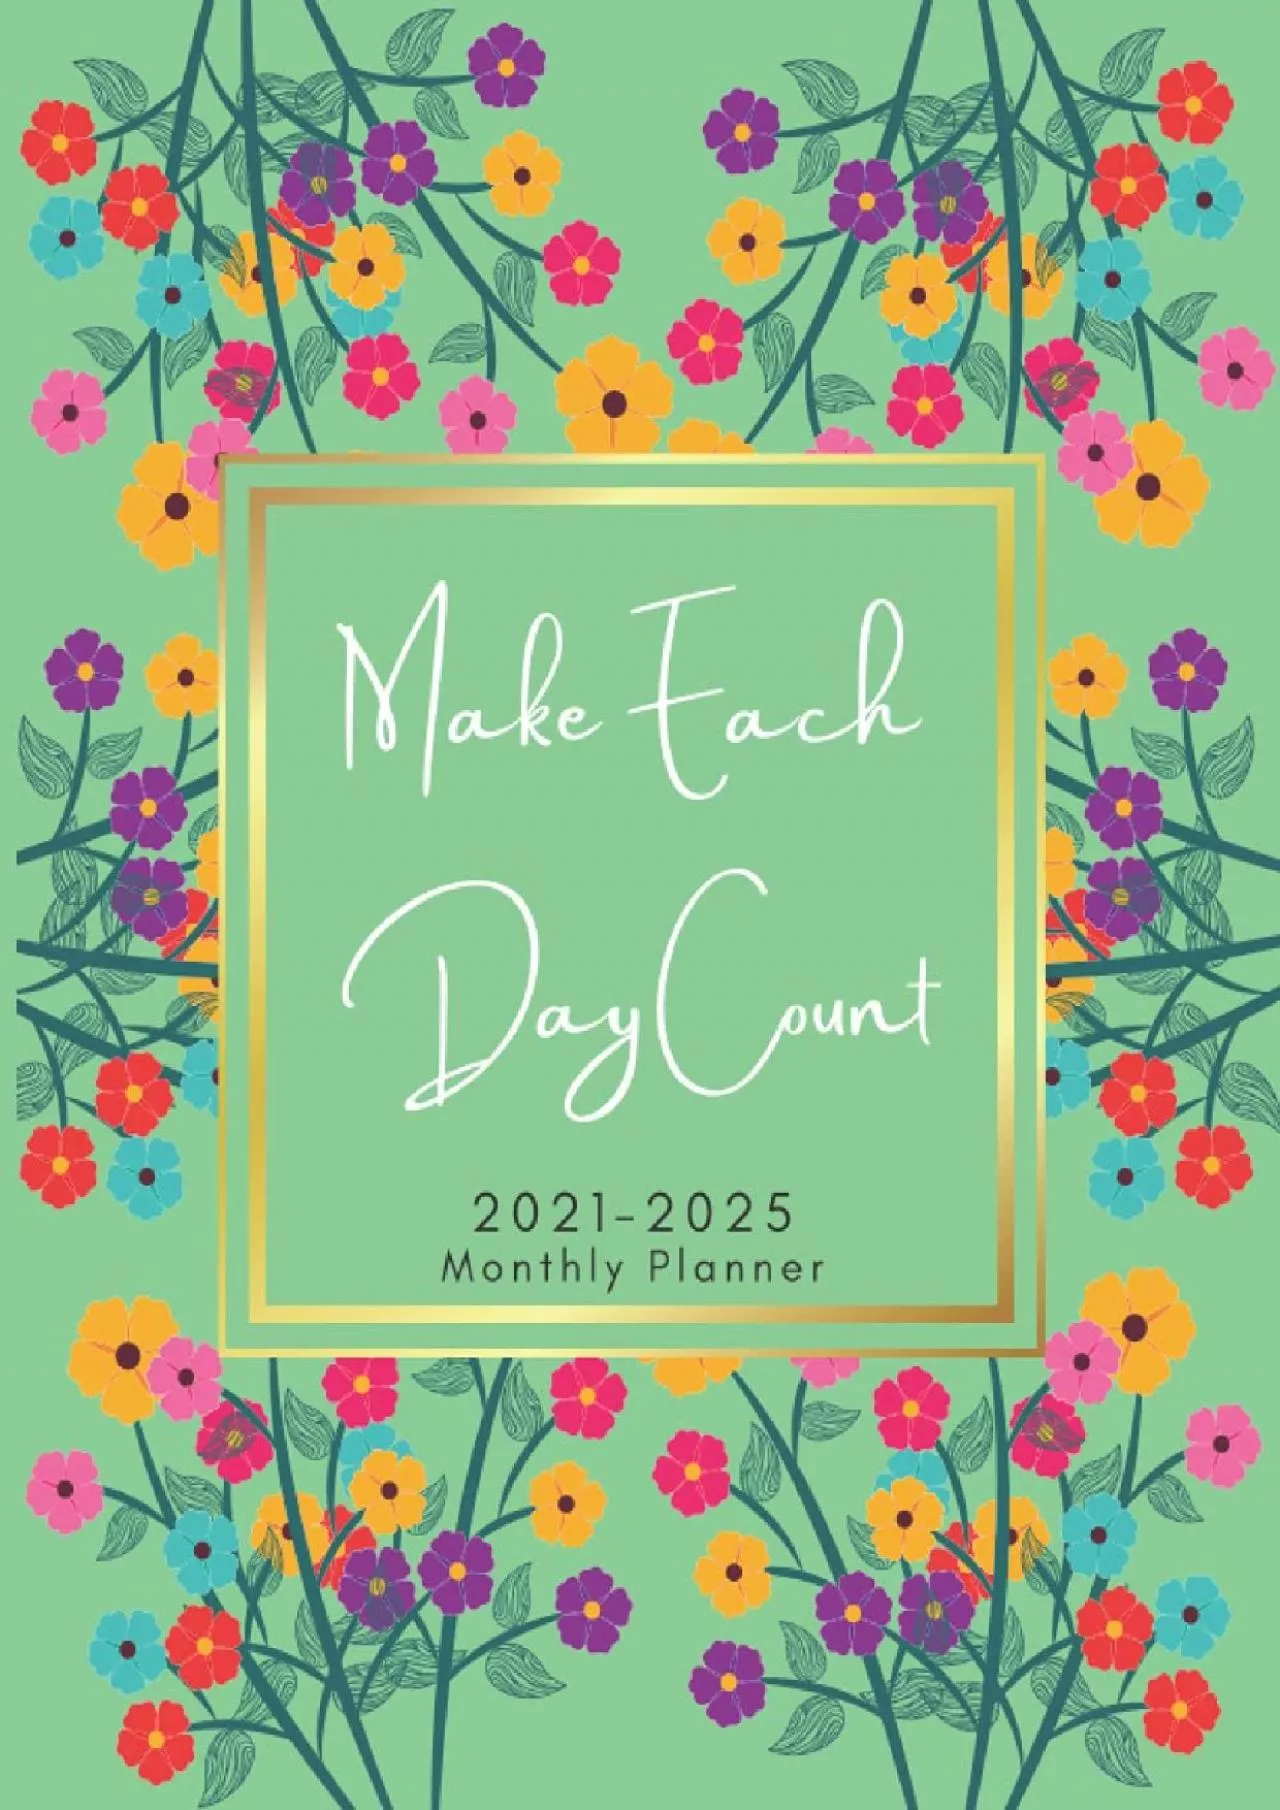 2021-2025 Make Each Day Count - 5 Years Monthly Planner: Five Year Monthly Planner with